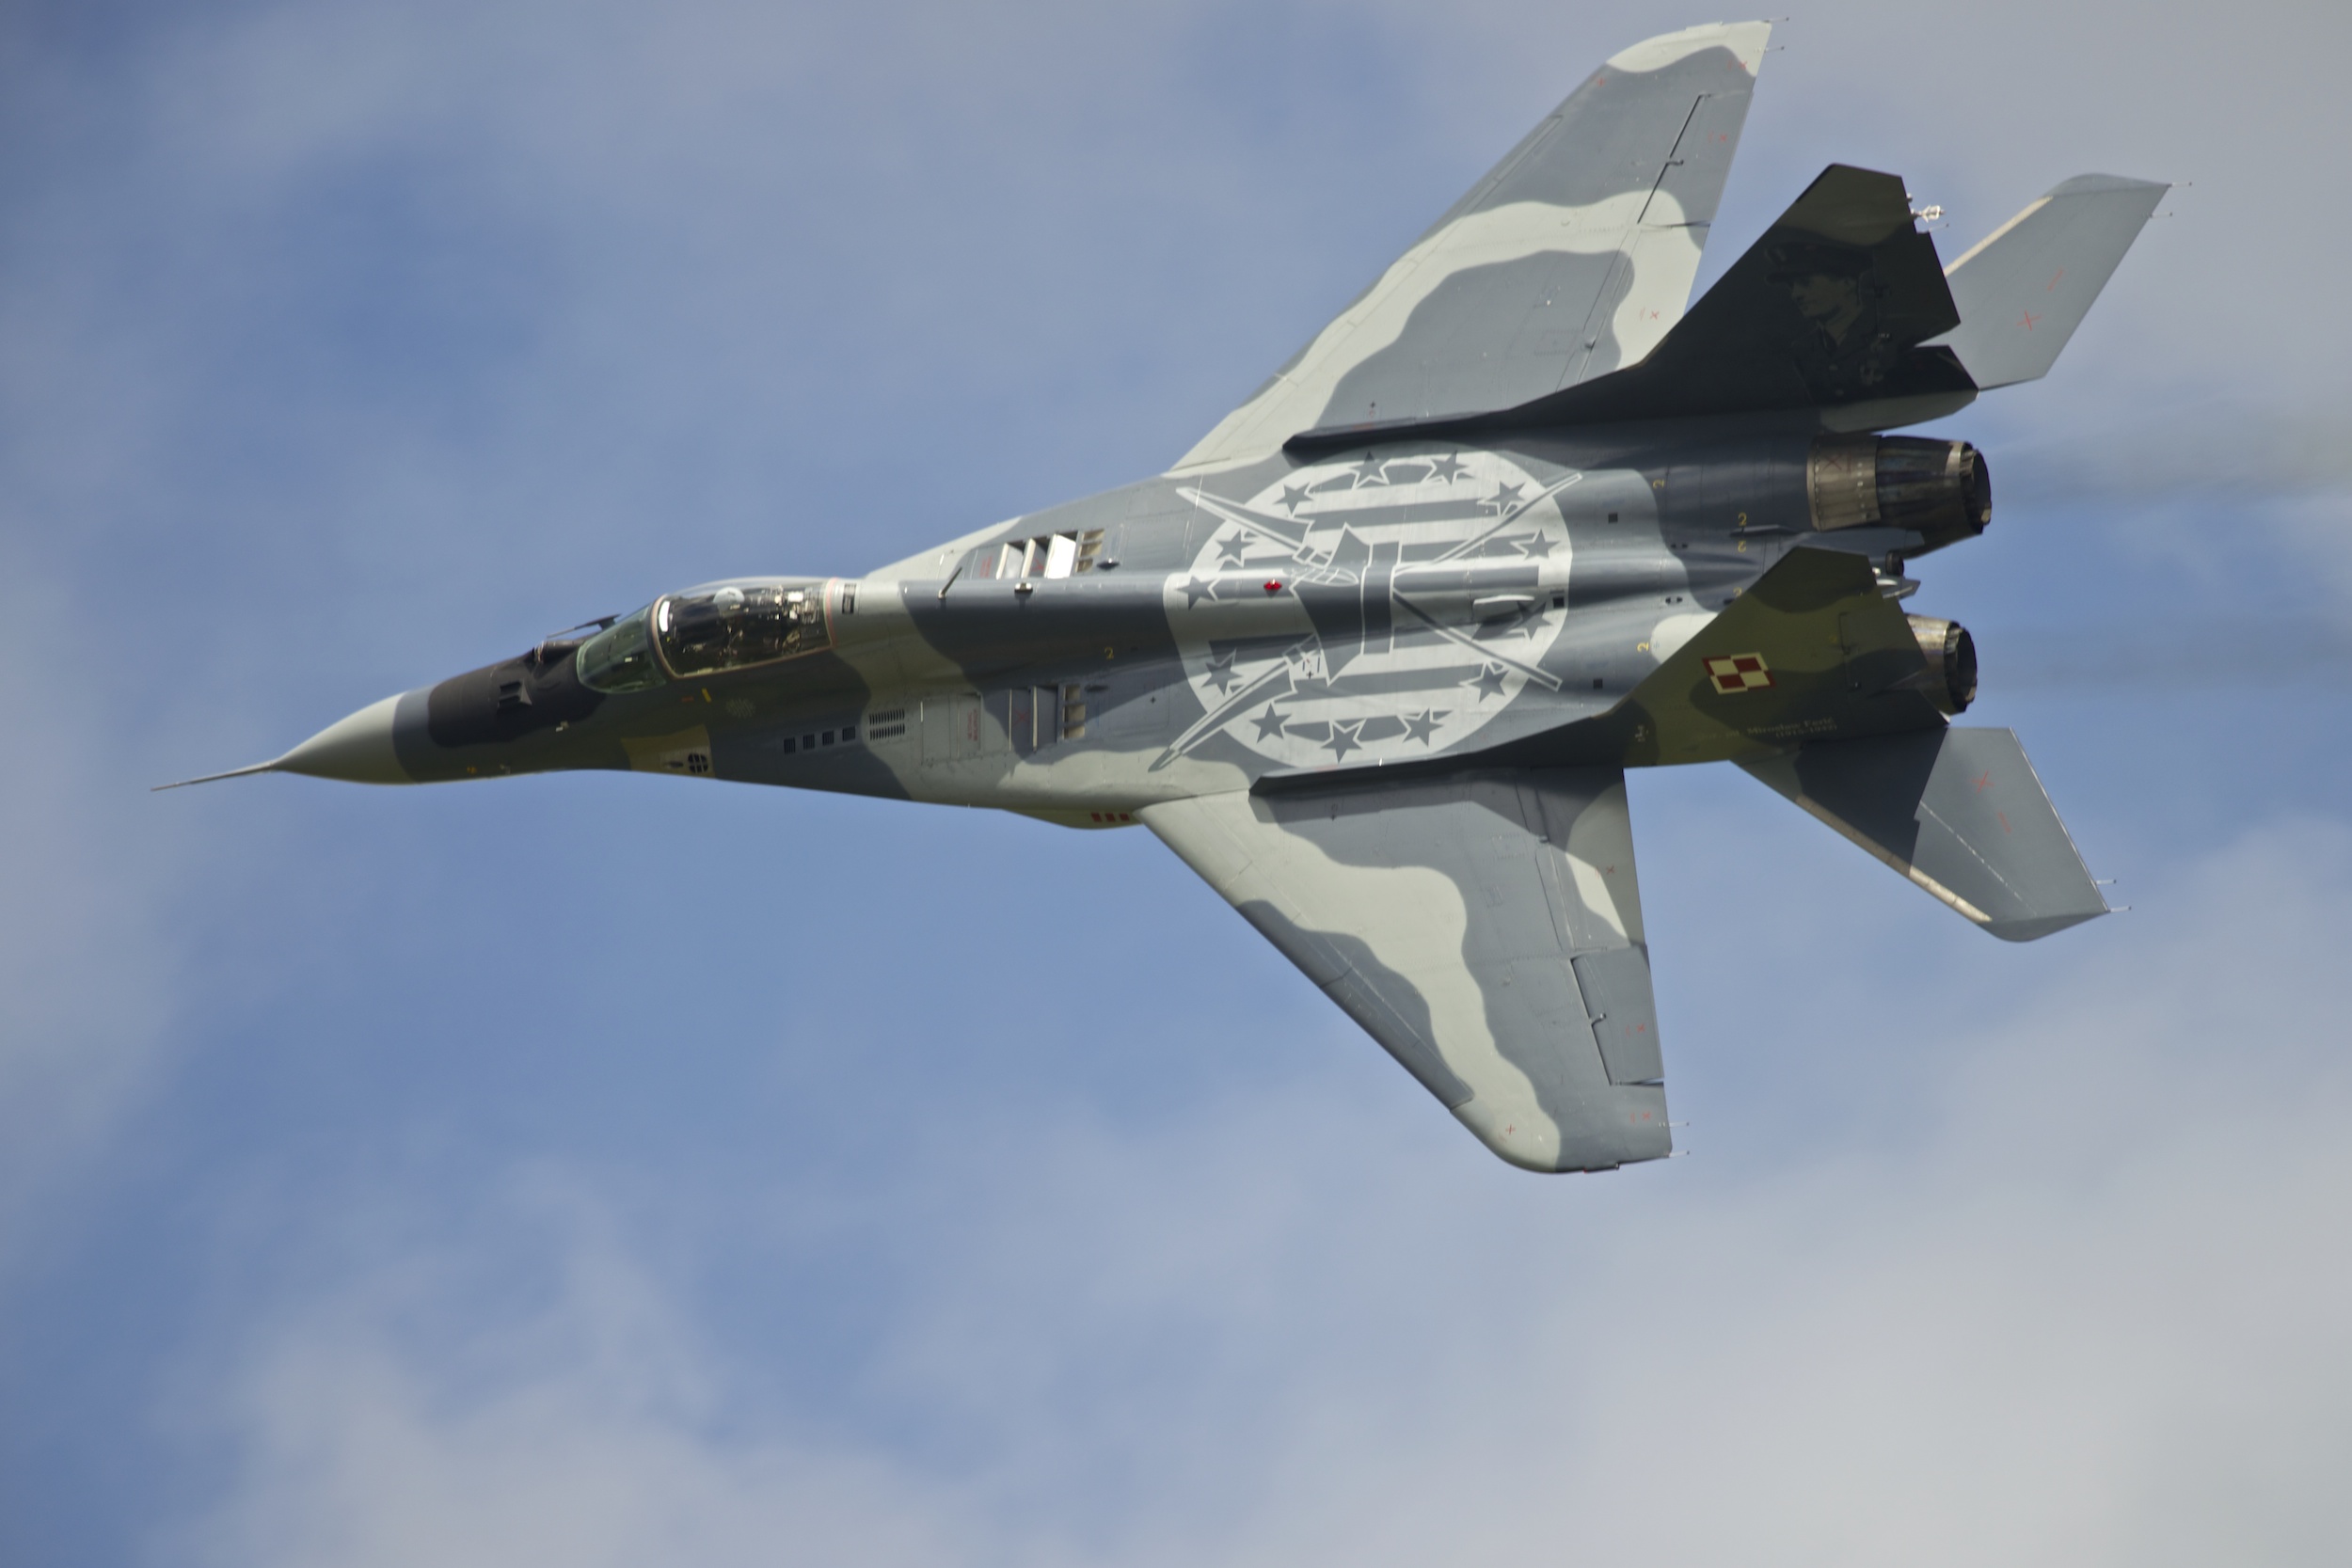 Russia threatens to destroy fighter jets gifted to Ukraine.